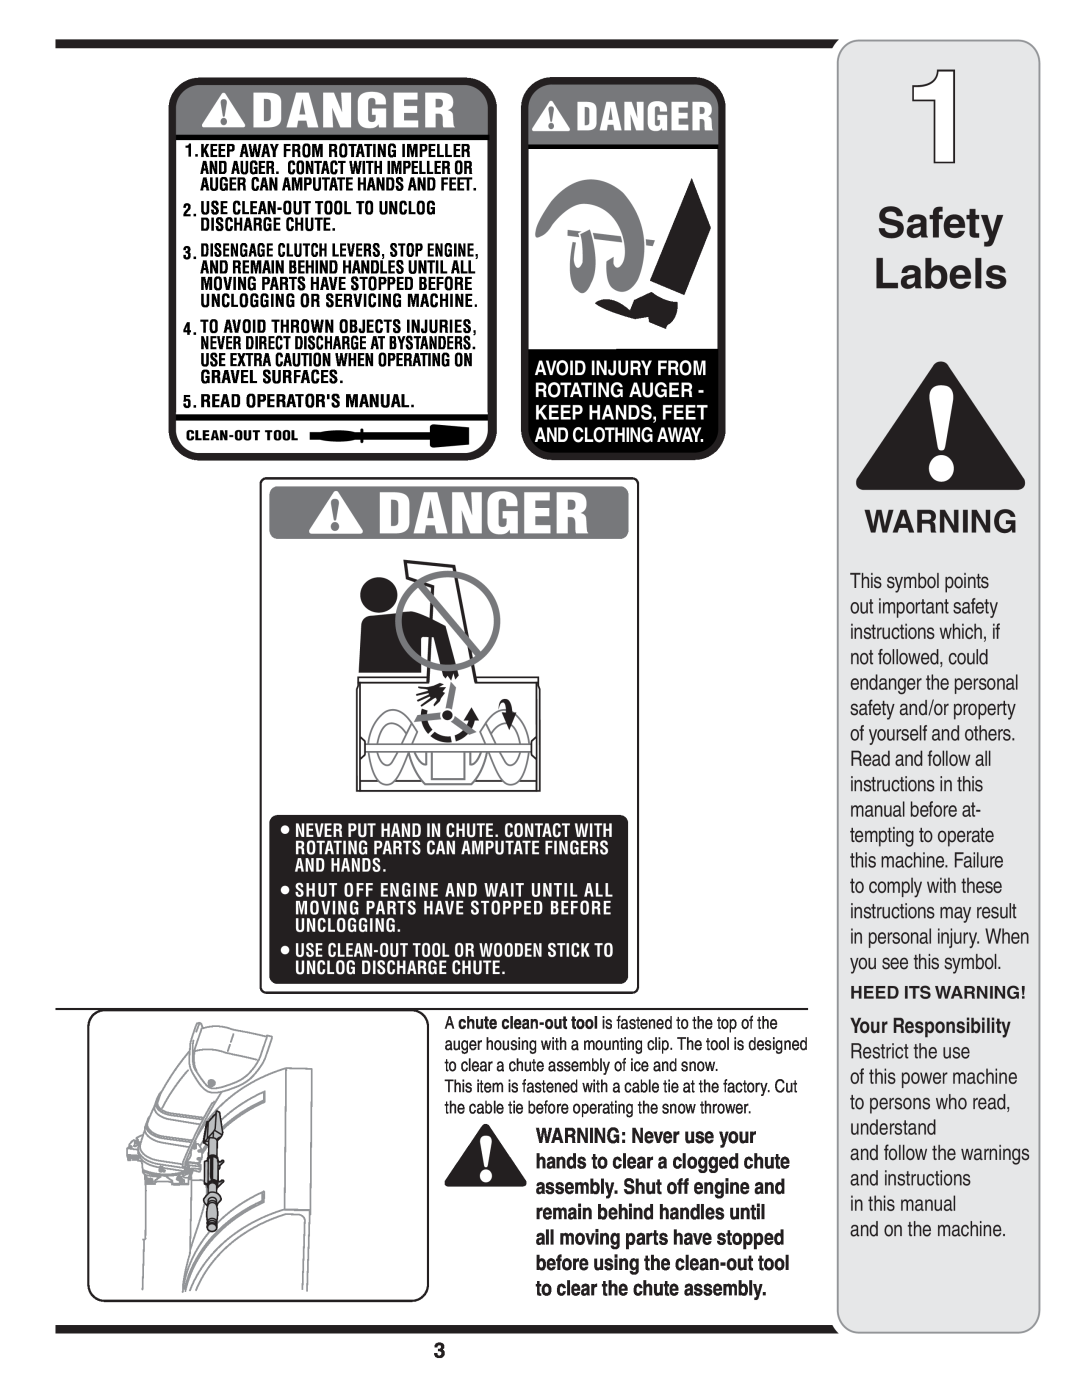 Troy-Bilt 31AH9Q77766 Safety Labels, Restrict the use, in this manual and on the machine, $!.%2, 6/$.*5299&2, 2/4!4. !5%2 